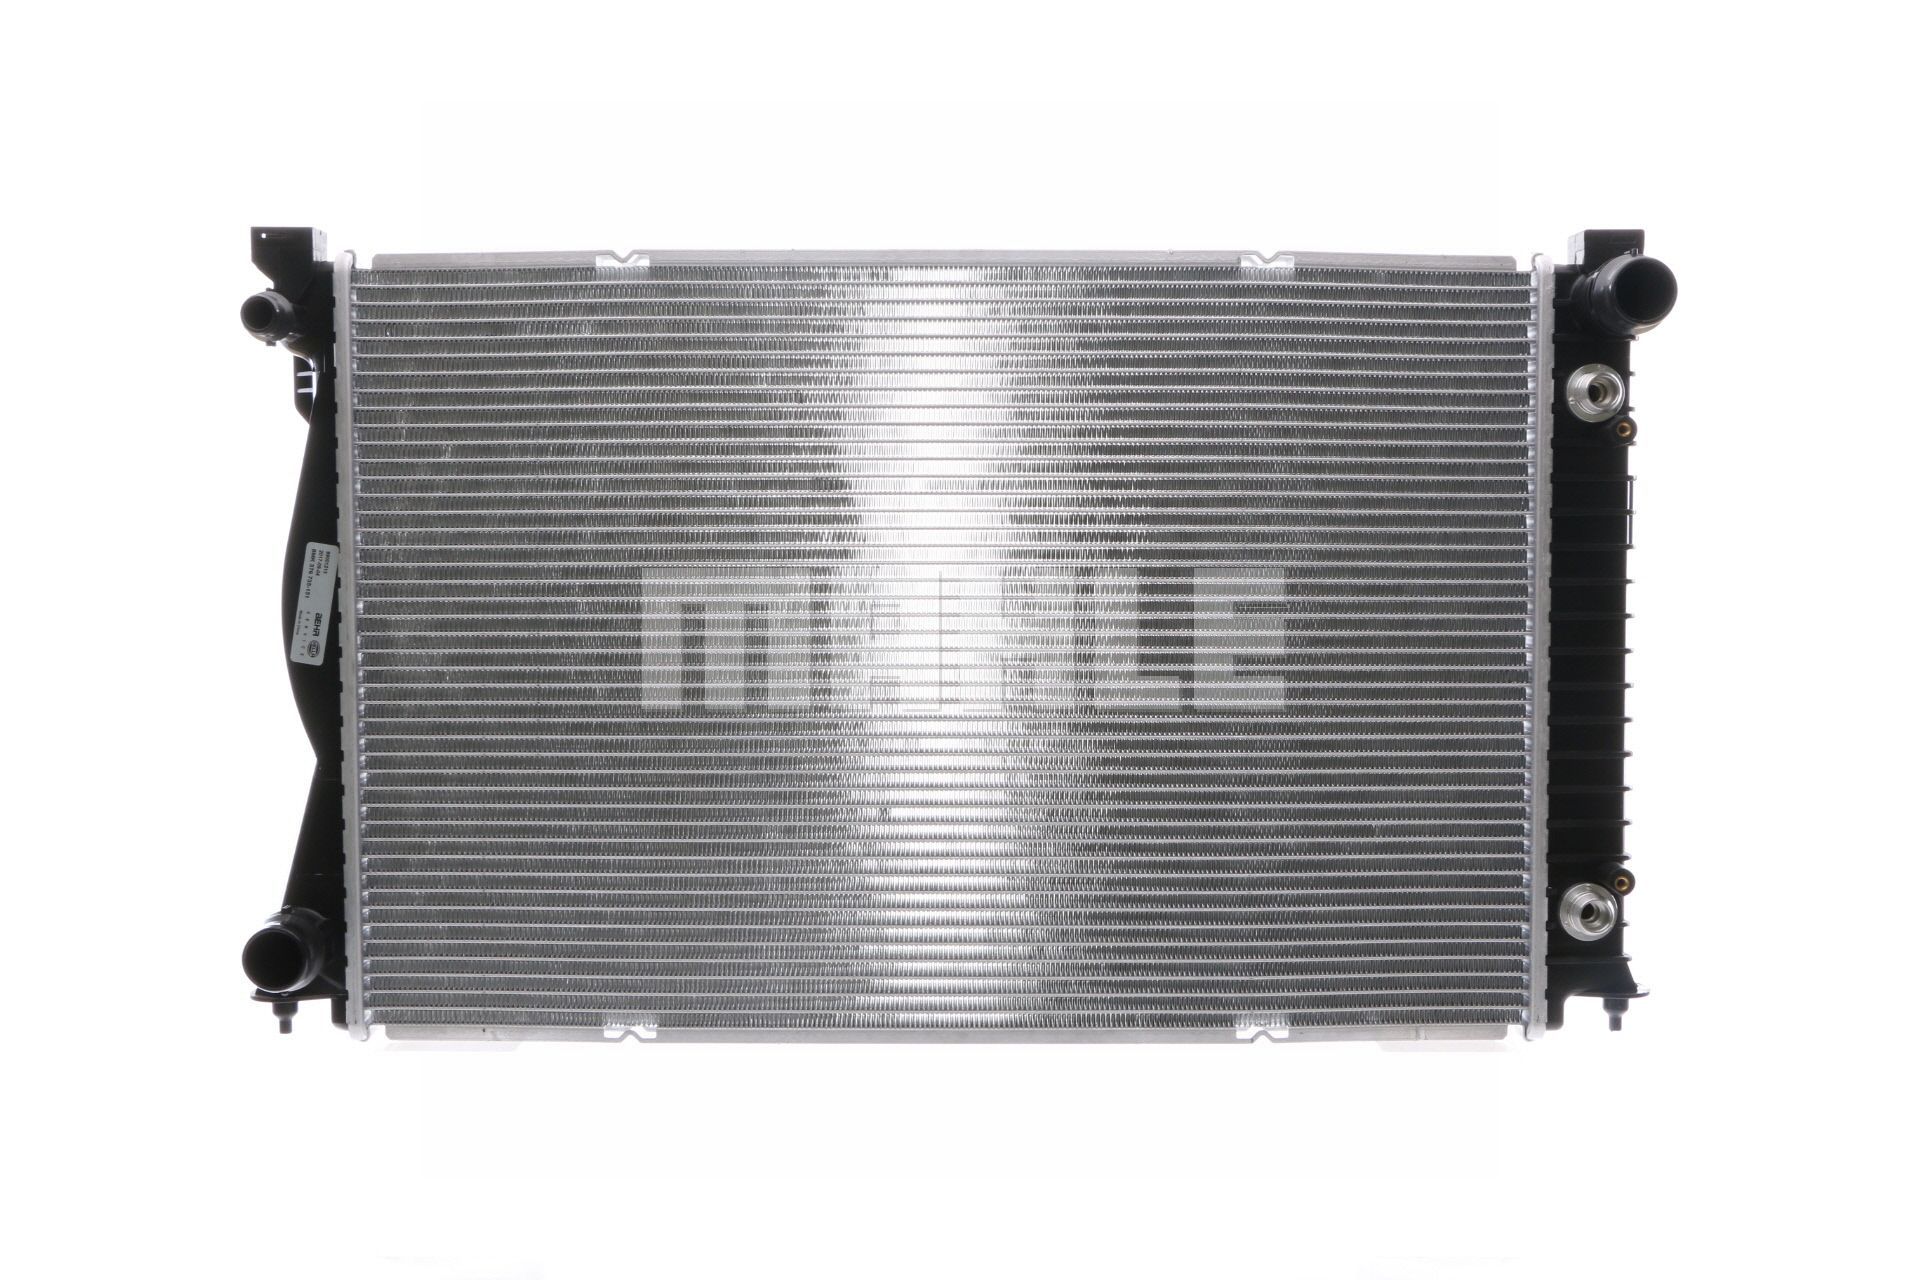 MAHLE ORIGINAL CR 842 000S Engine radiator for vehicles with air conditioning, 678 x 438 x 32 mm, Automatic Transmission, Brazed cooling fins